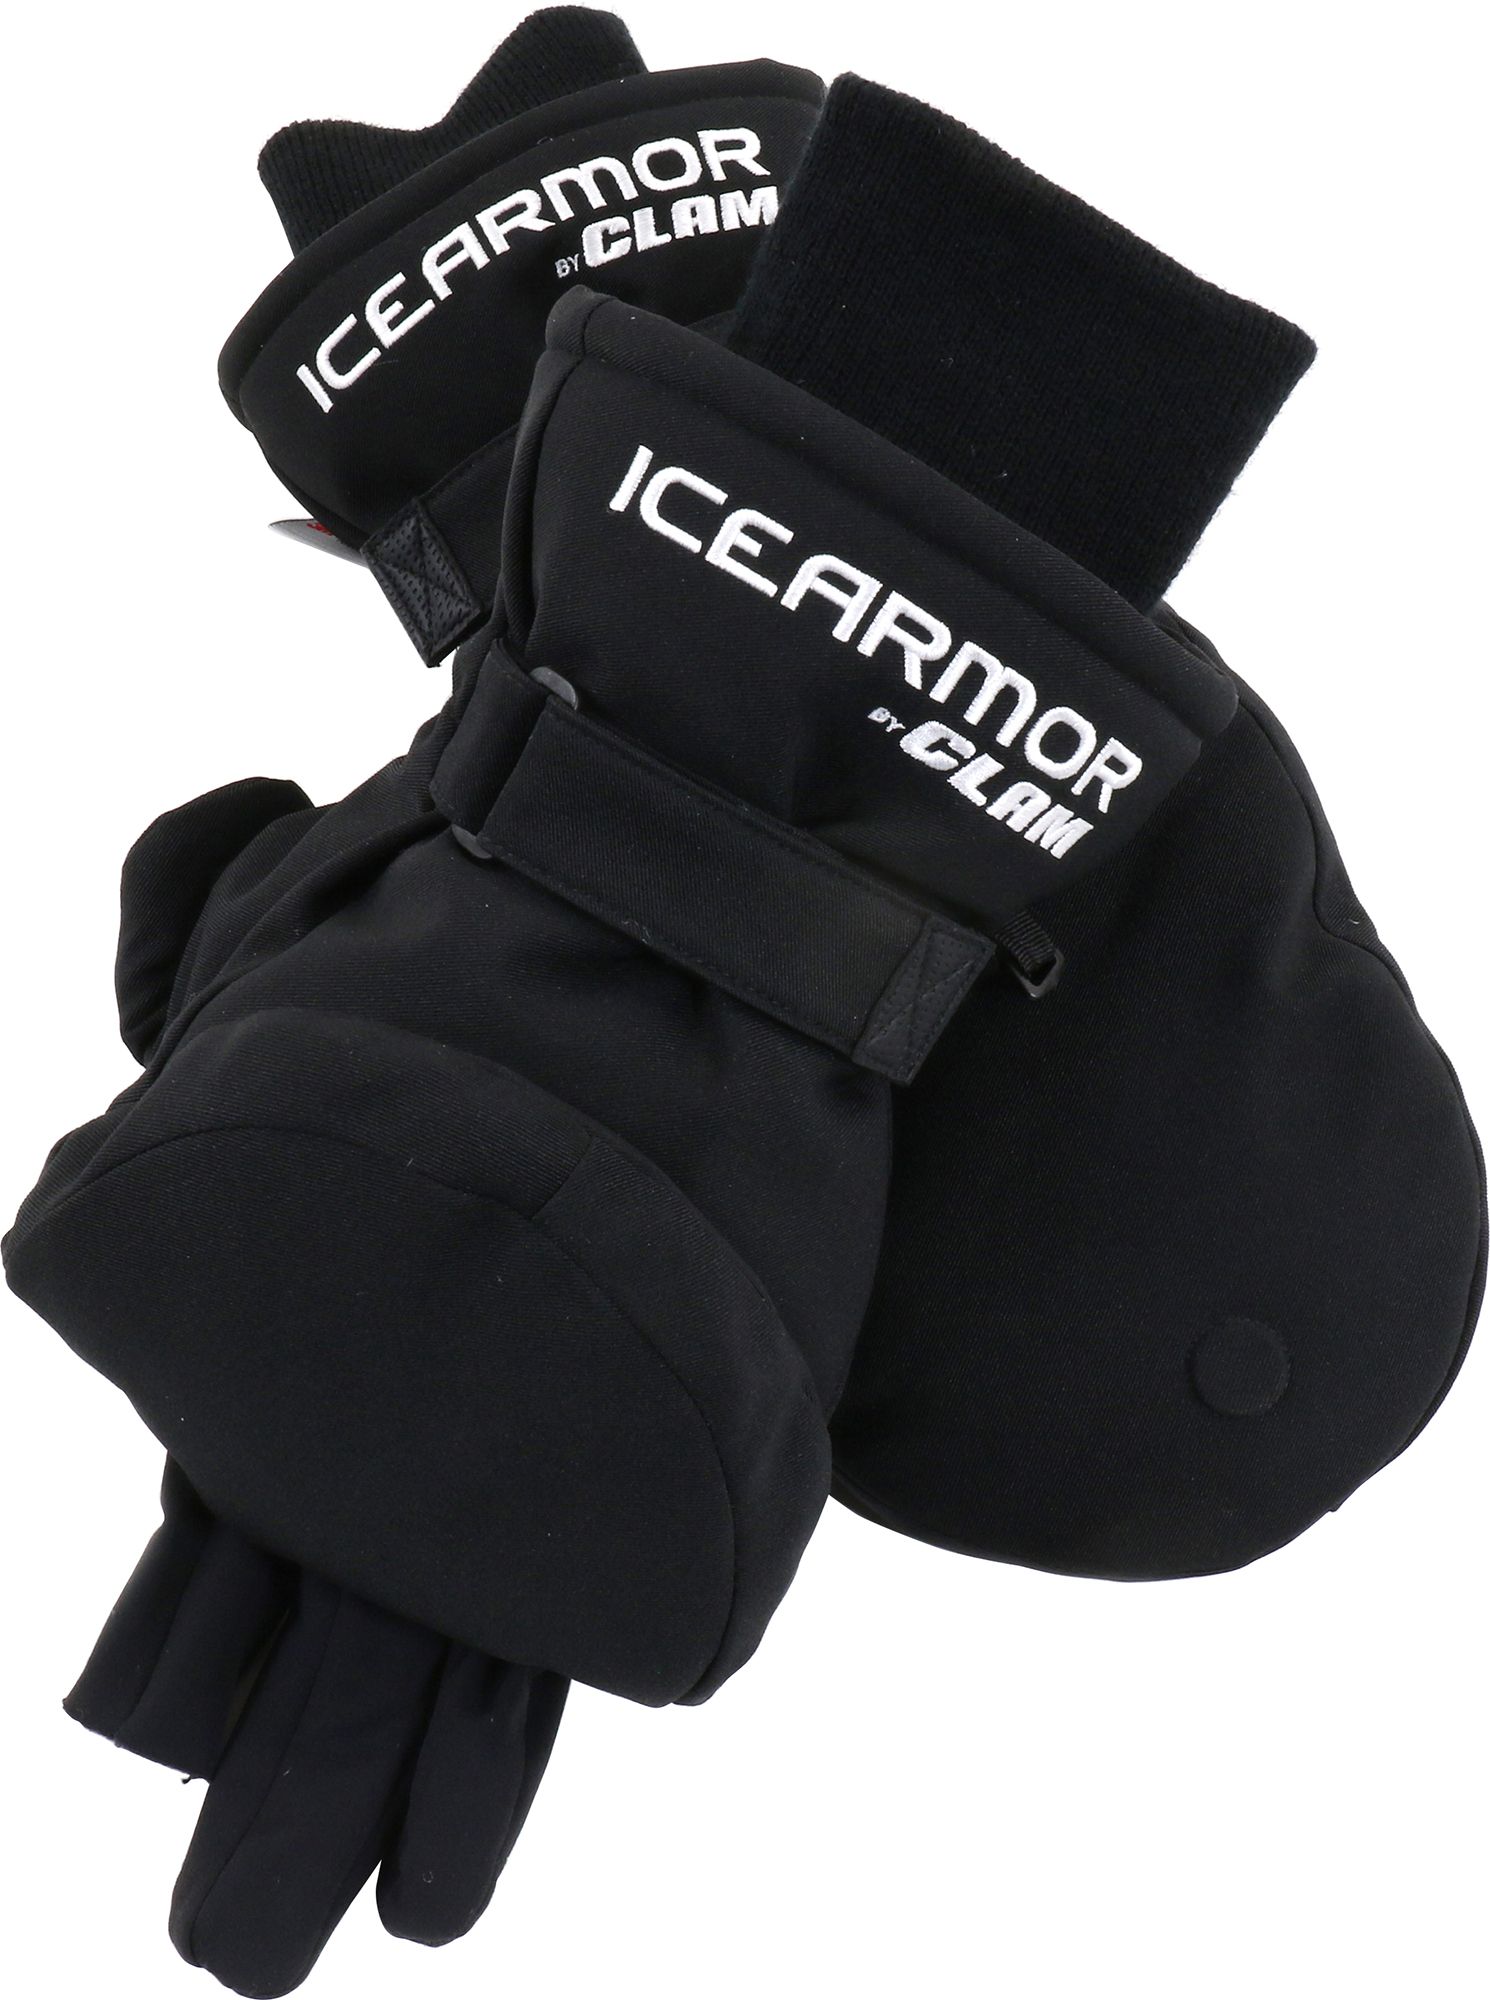 Ice Fishing Safety Gear  Curbside Pickup Available at DICK'S